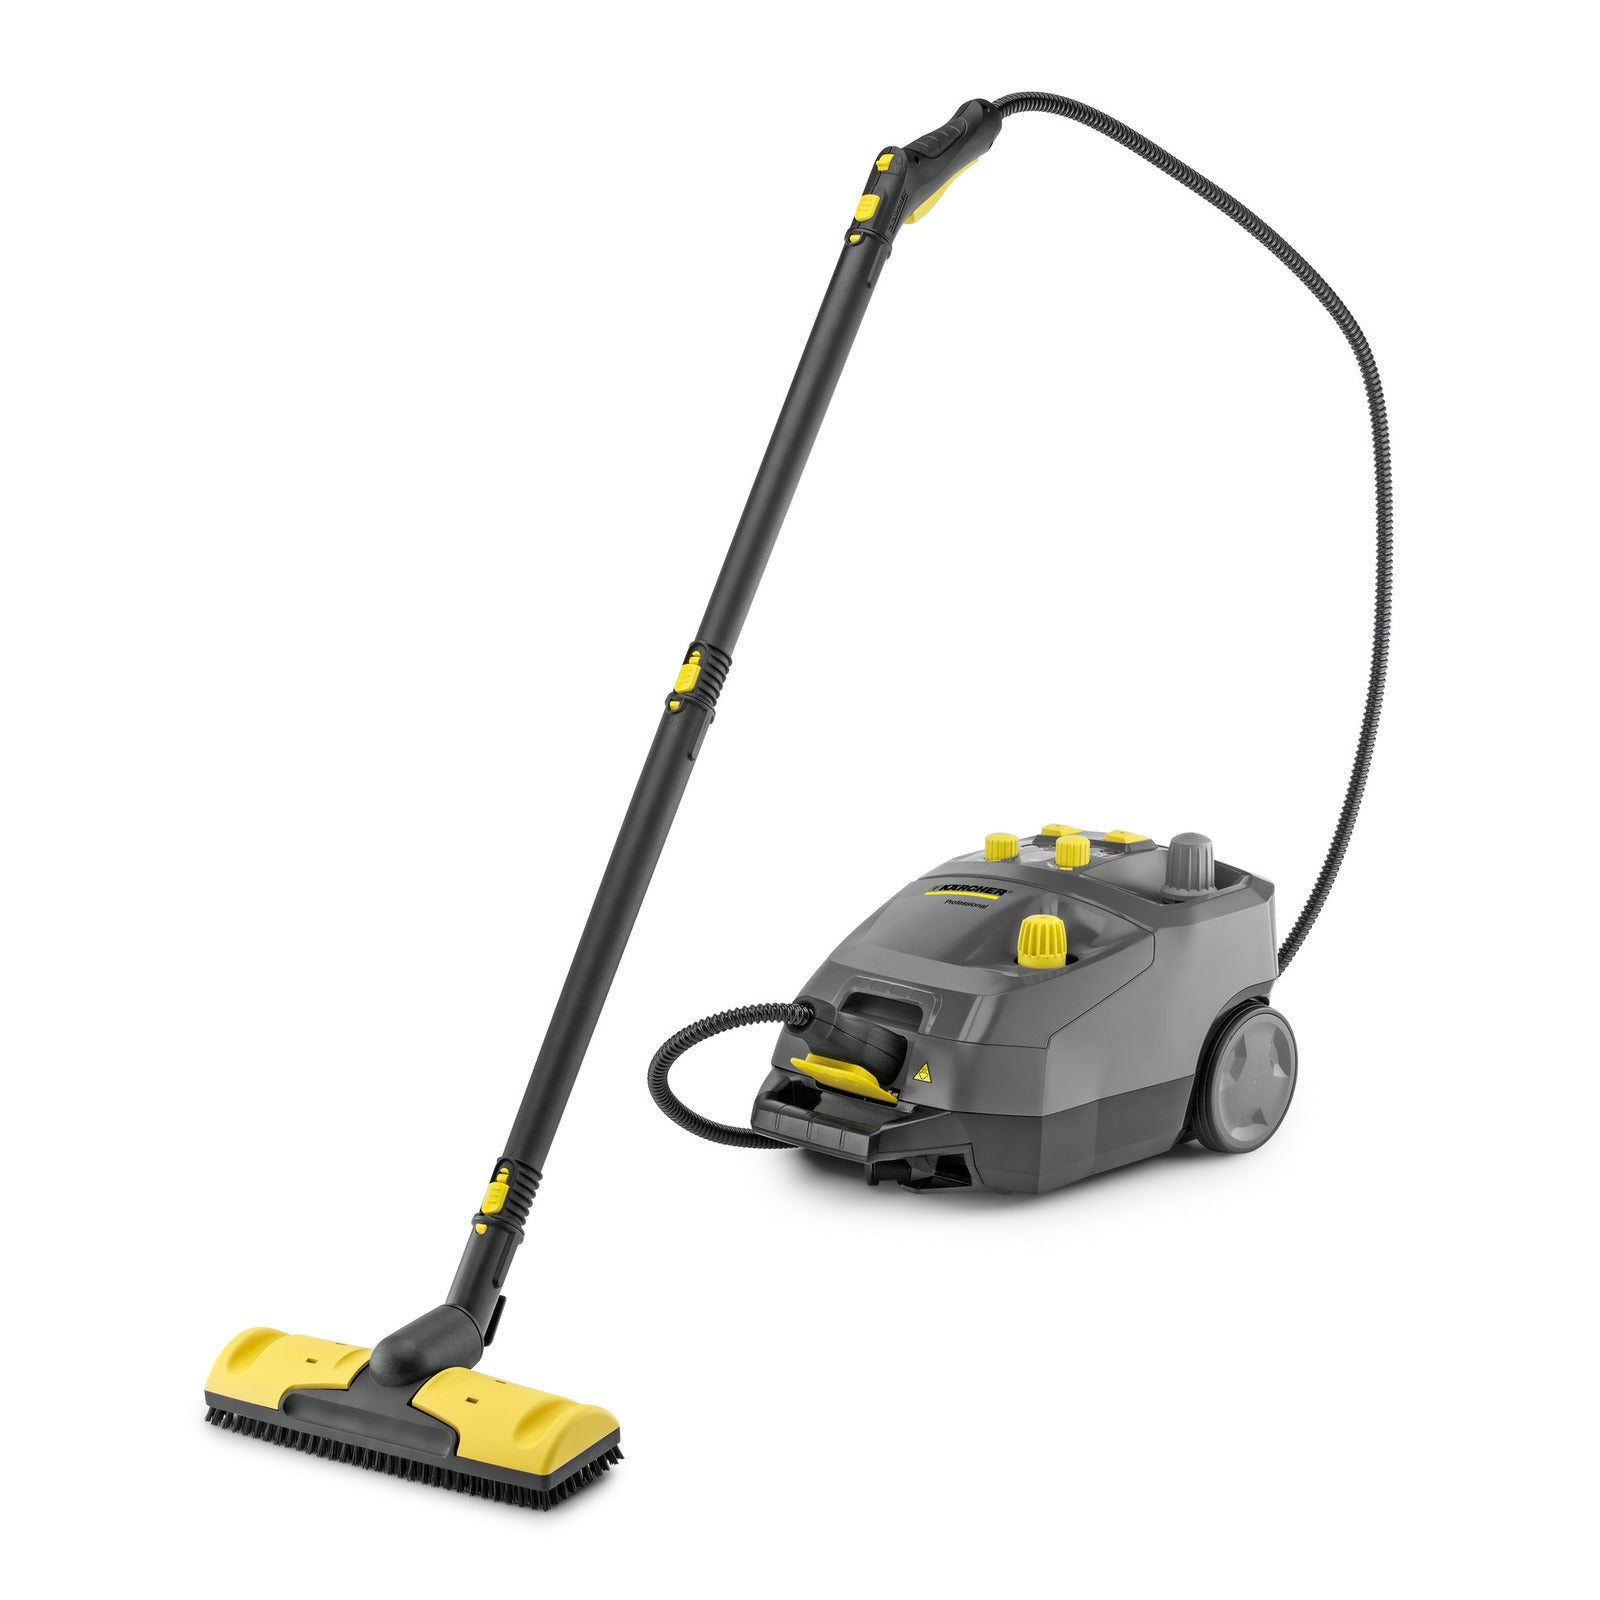 Karcher SG 4/4, commercial steam cleaner with transport cart (9.841-414.0) - CalCleaningEquipment